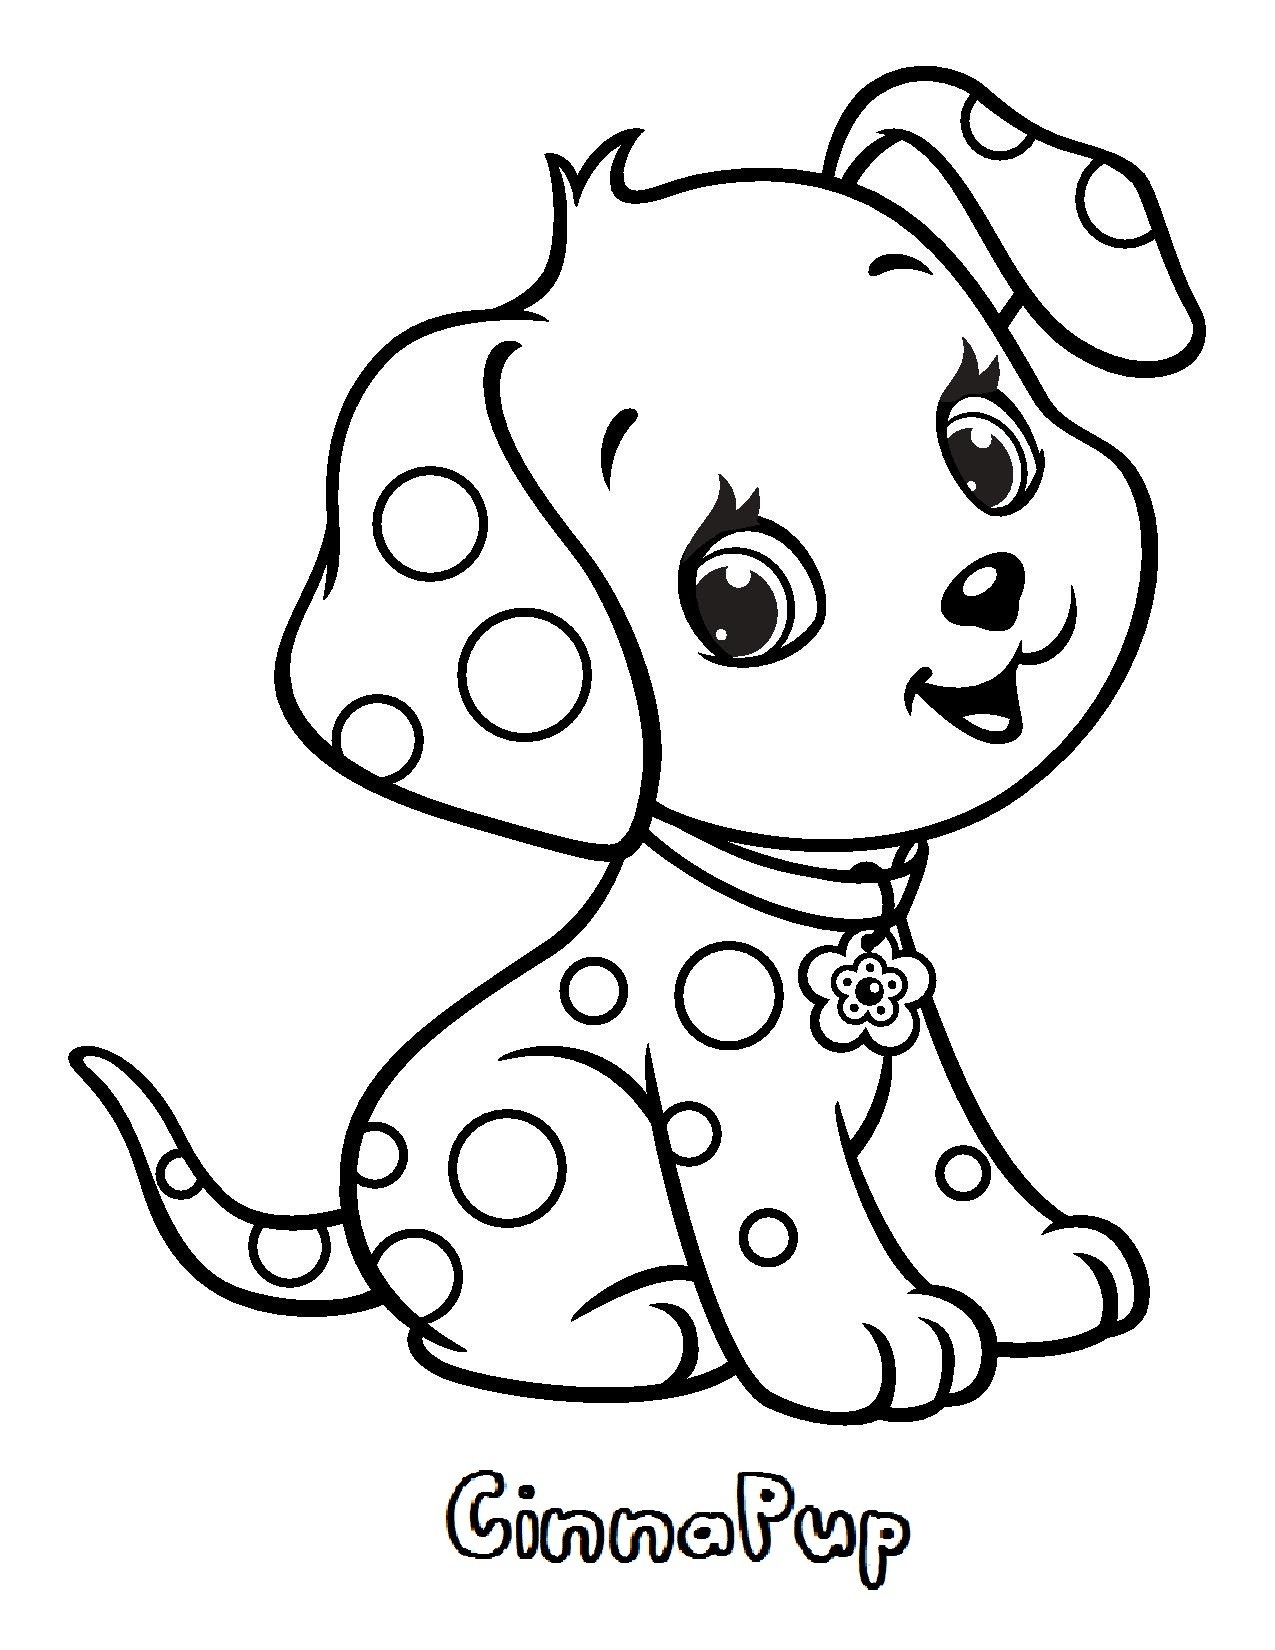 Puppy Coloring Pages   Free Printable Coloring Pages for Kids